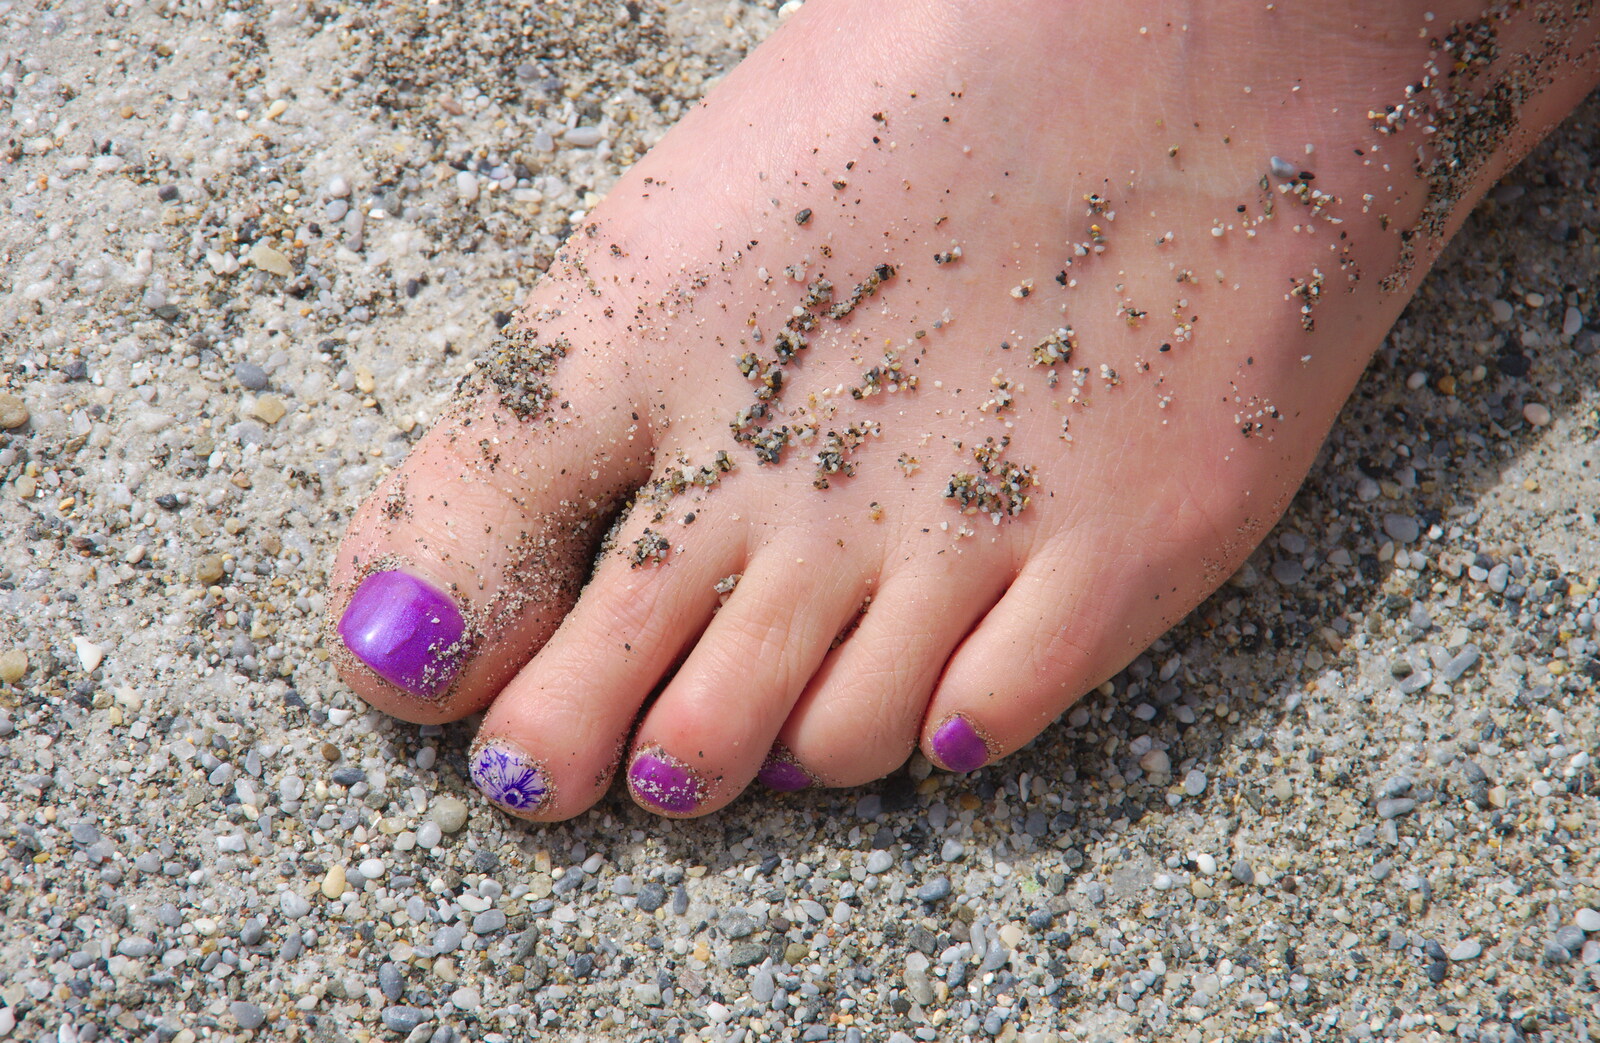 Isobel's painted toes in the sand from Torrecilla Beach and the Nerja Museum, Andalusia, Spain - 17th April 2019